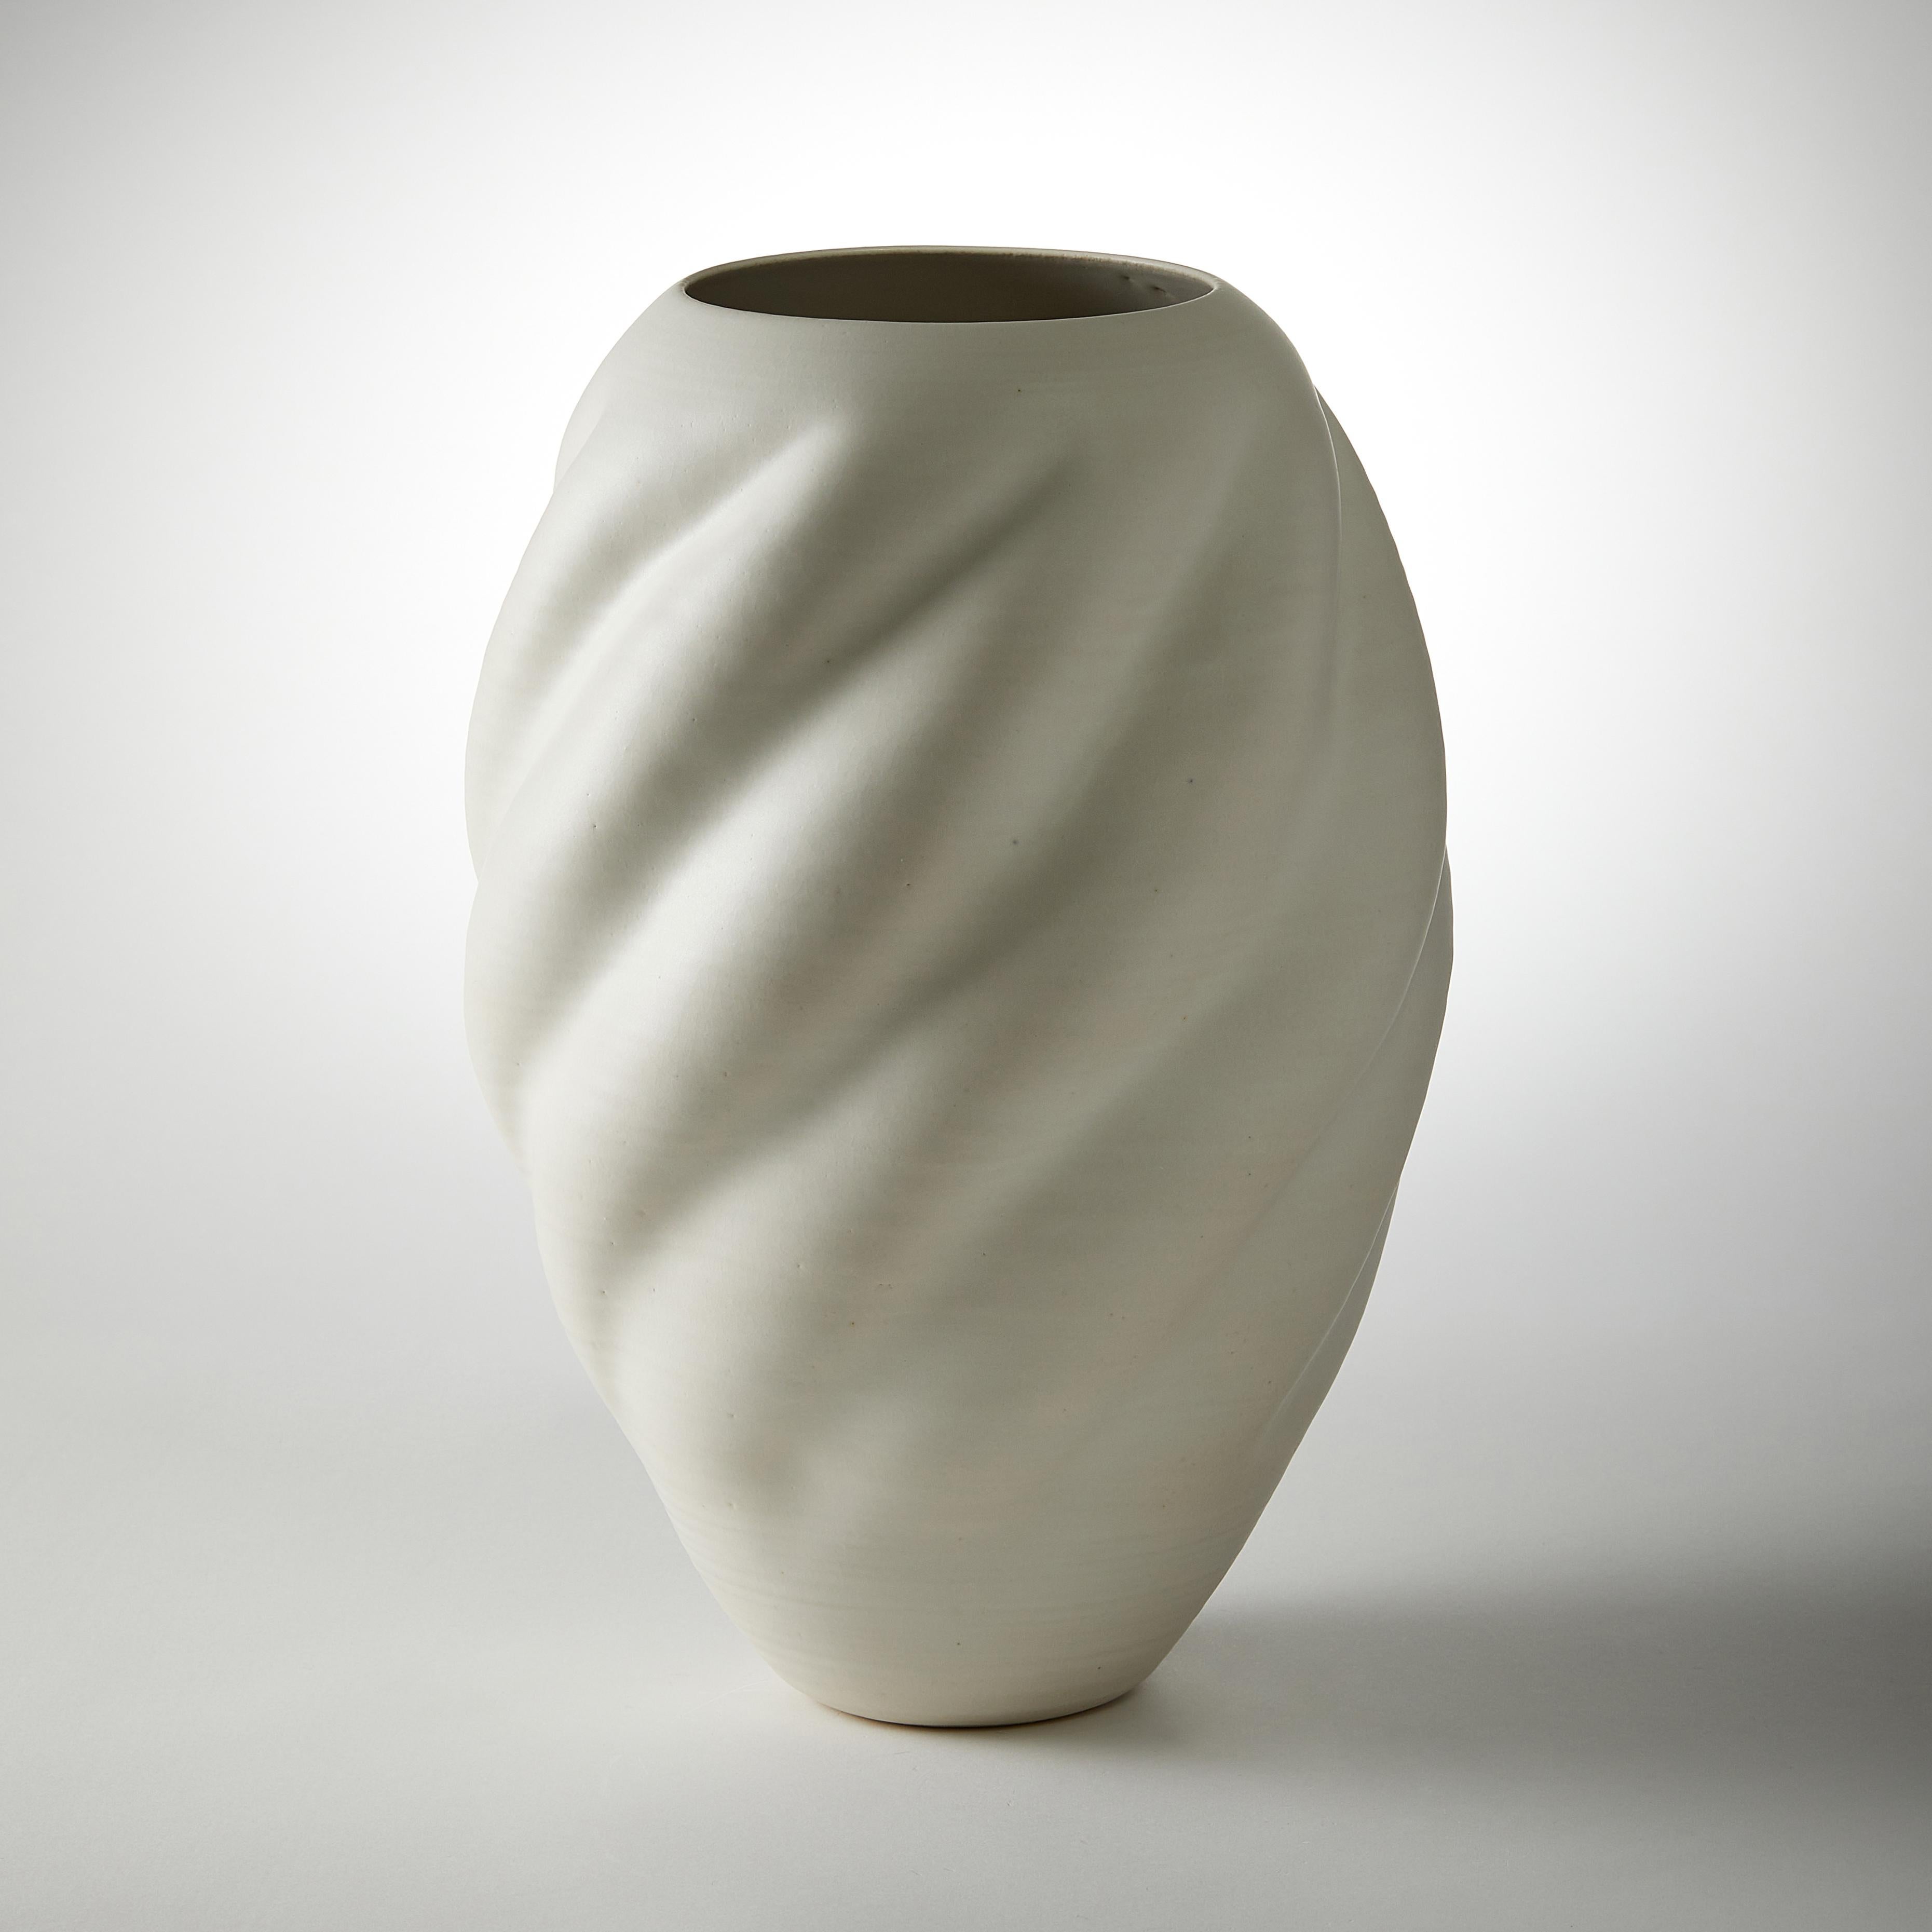 Tall White wave Form No 44 is a unique ceramic sculptural vessel by the British artist Nicholas Arroyave-Portela, made from white St.Thomas clay with stoneware glazes.

Nicholas Arroyave-Portela’s professional ceramic practice began in 1994. After